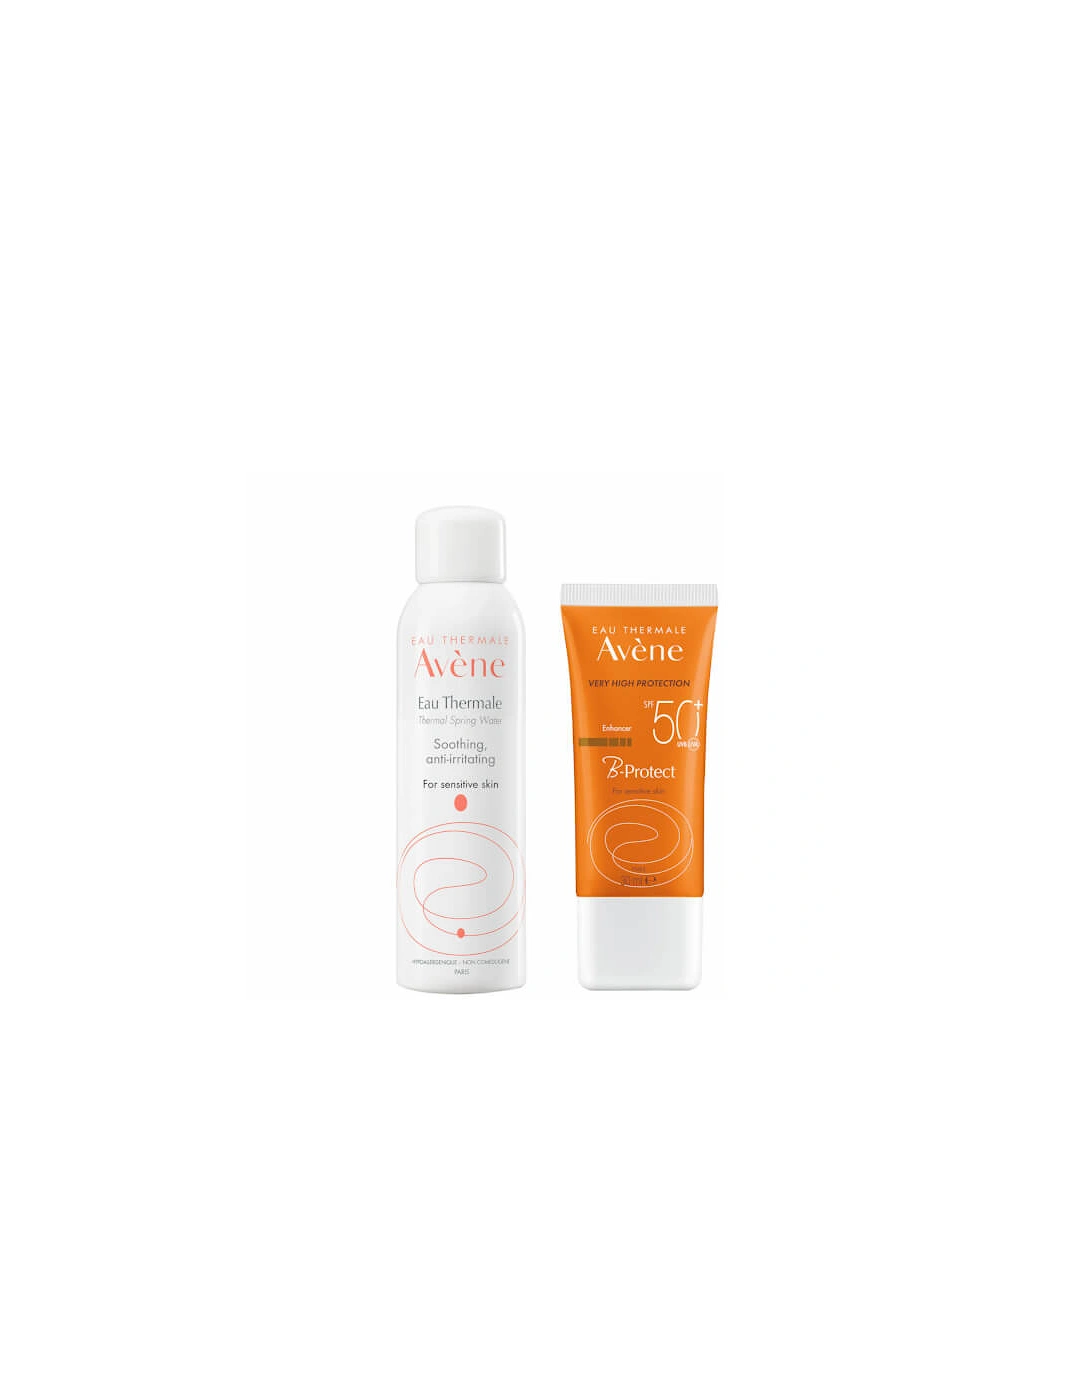 Avène Exclusive SPF and Thermal Water Bundle, 2 of 1